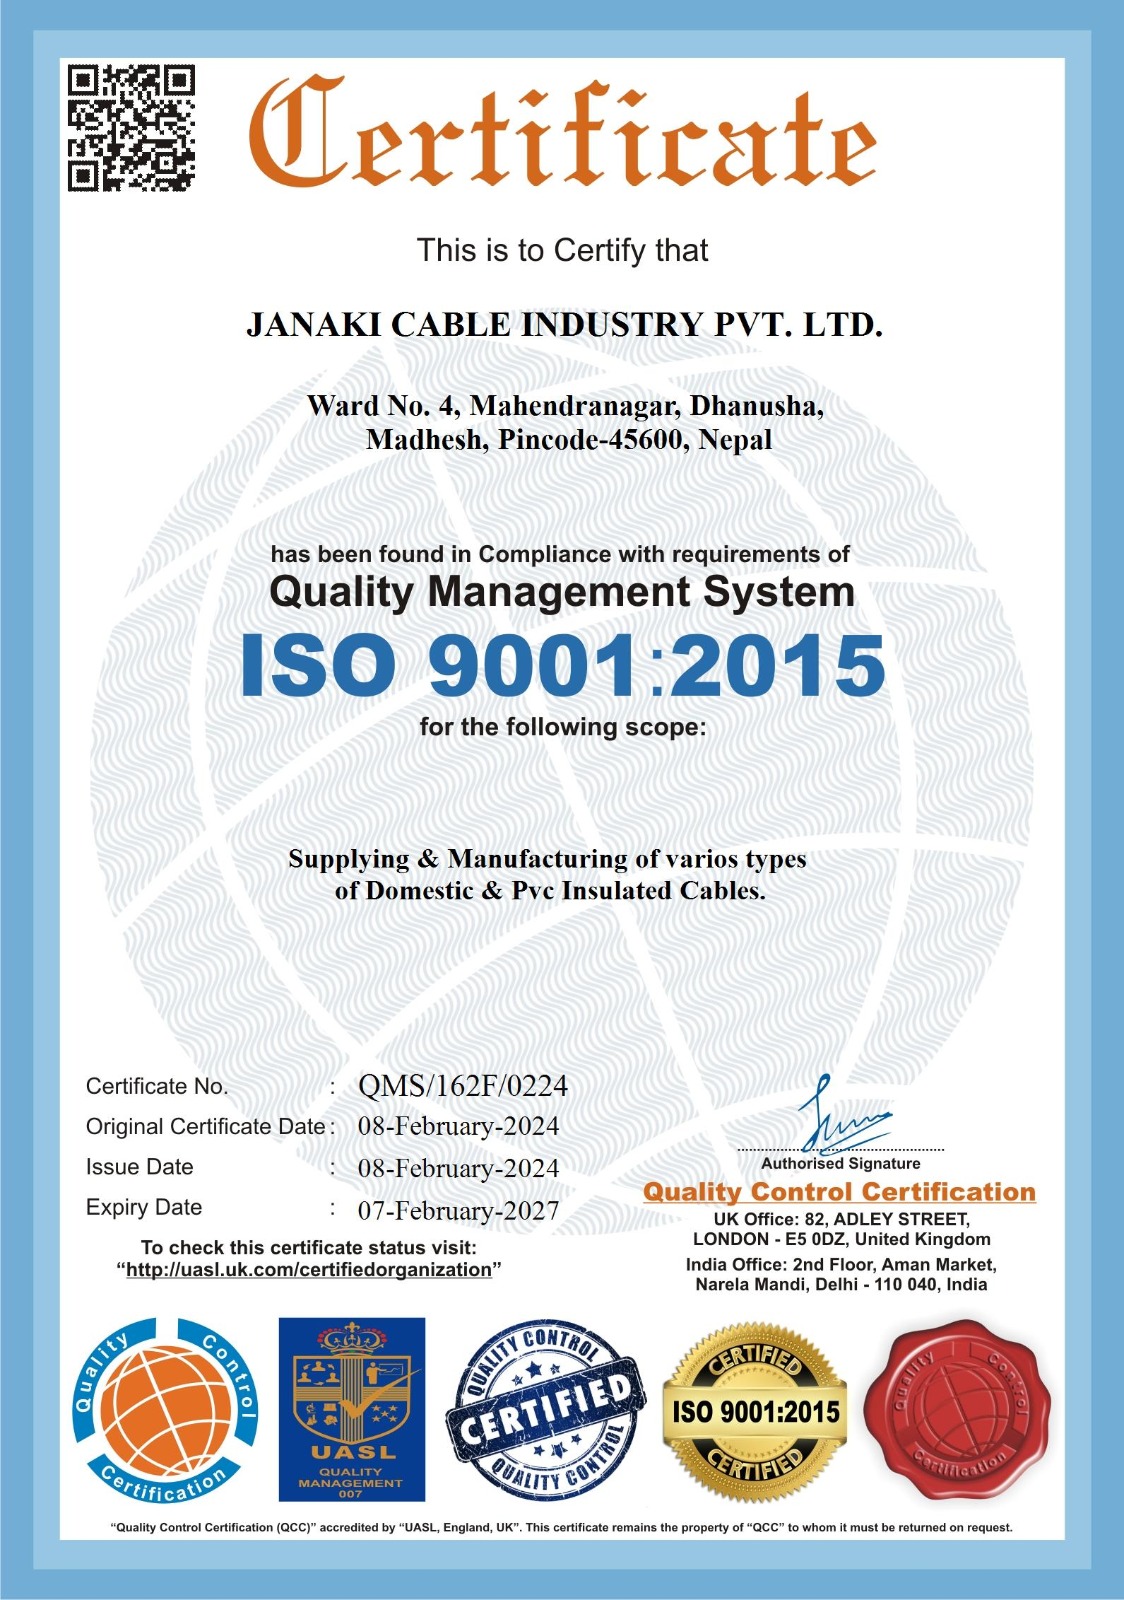 Janaki Cable Industry PVT. LTD. ISO 9001-2015 Certification by Certification House.